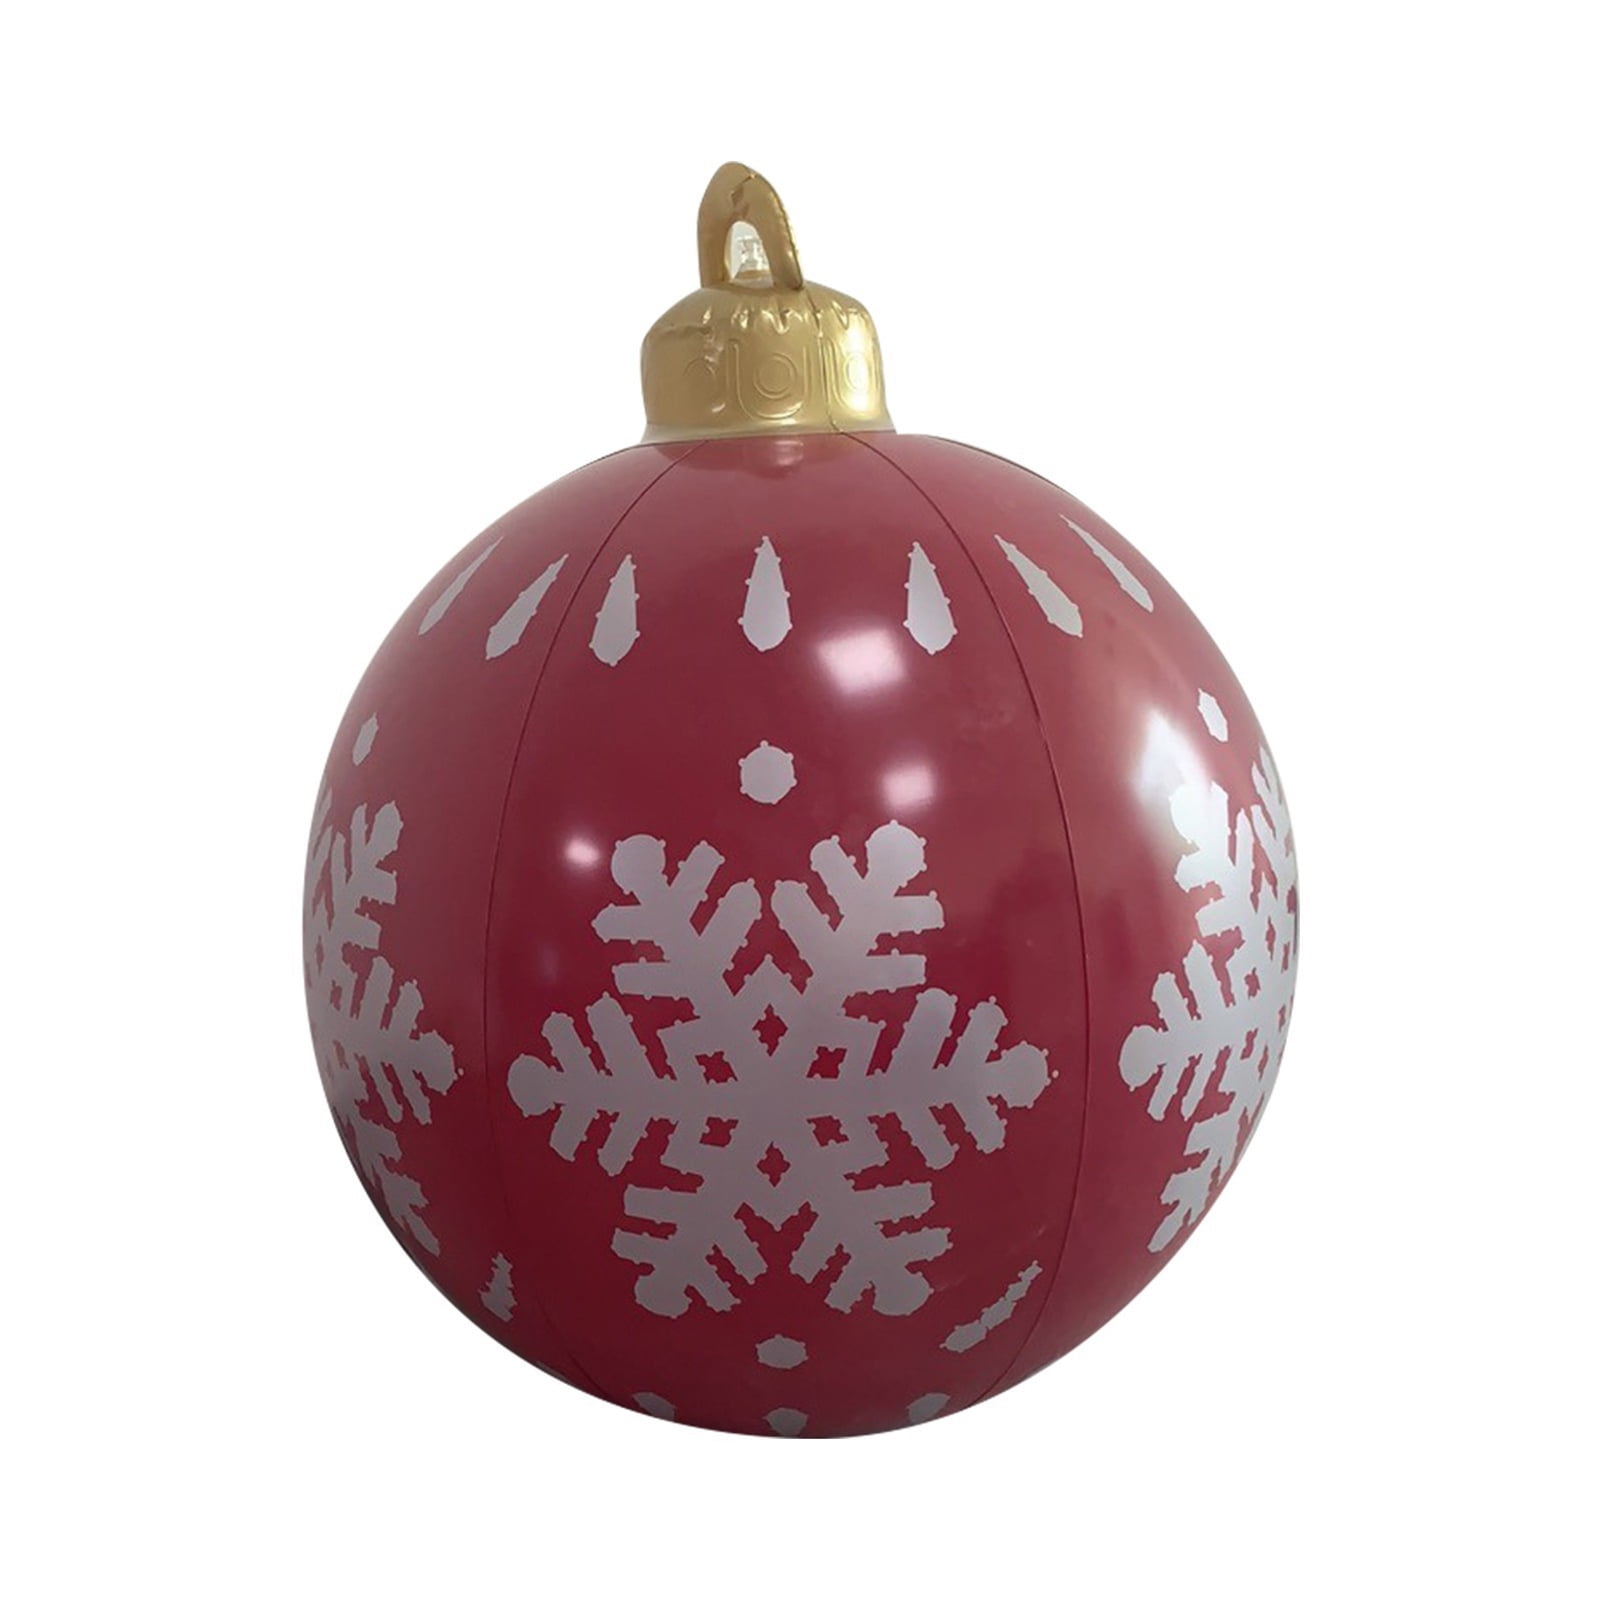 Outdoor Christmas PVC Inflatable Decorated Ball with Inflating Pump 60cm in Diameter  Garden Yard Lawn Festival Decor - Walmart.com